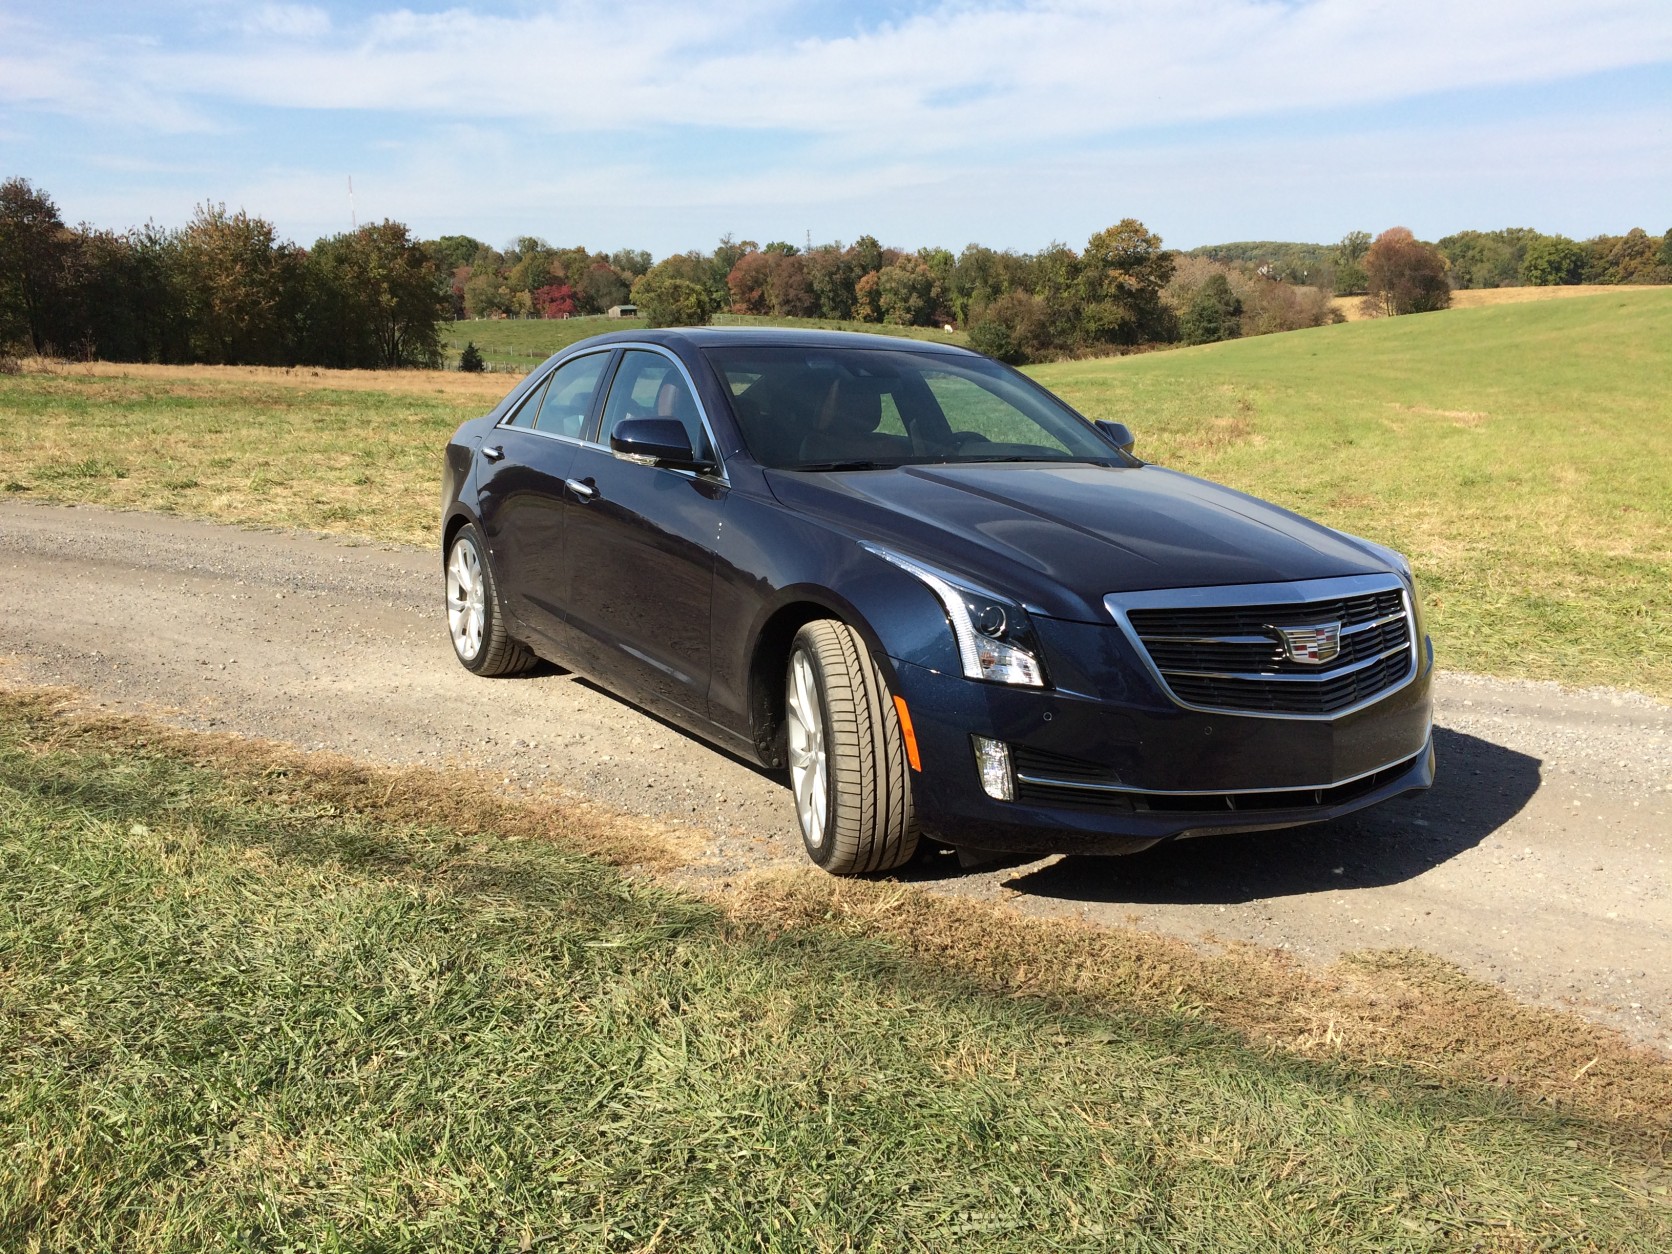 The 2016 Cadillac ATS sedan finally has the engine it should have to make this a real competitor in the small luxury sedan market. (WTOP/Mike Parris) 